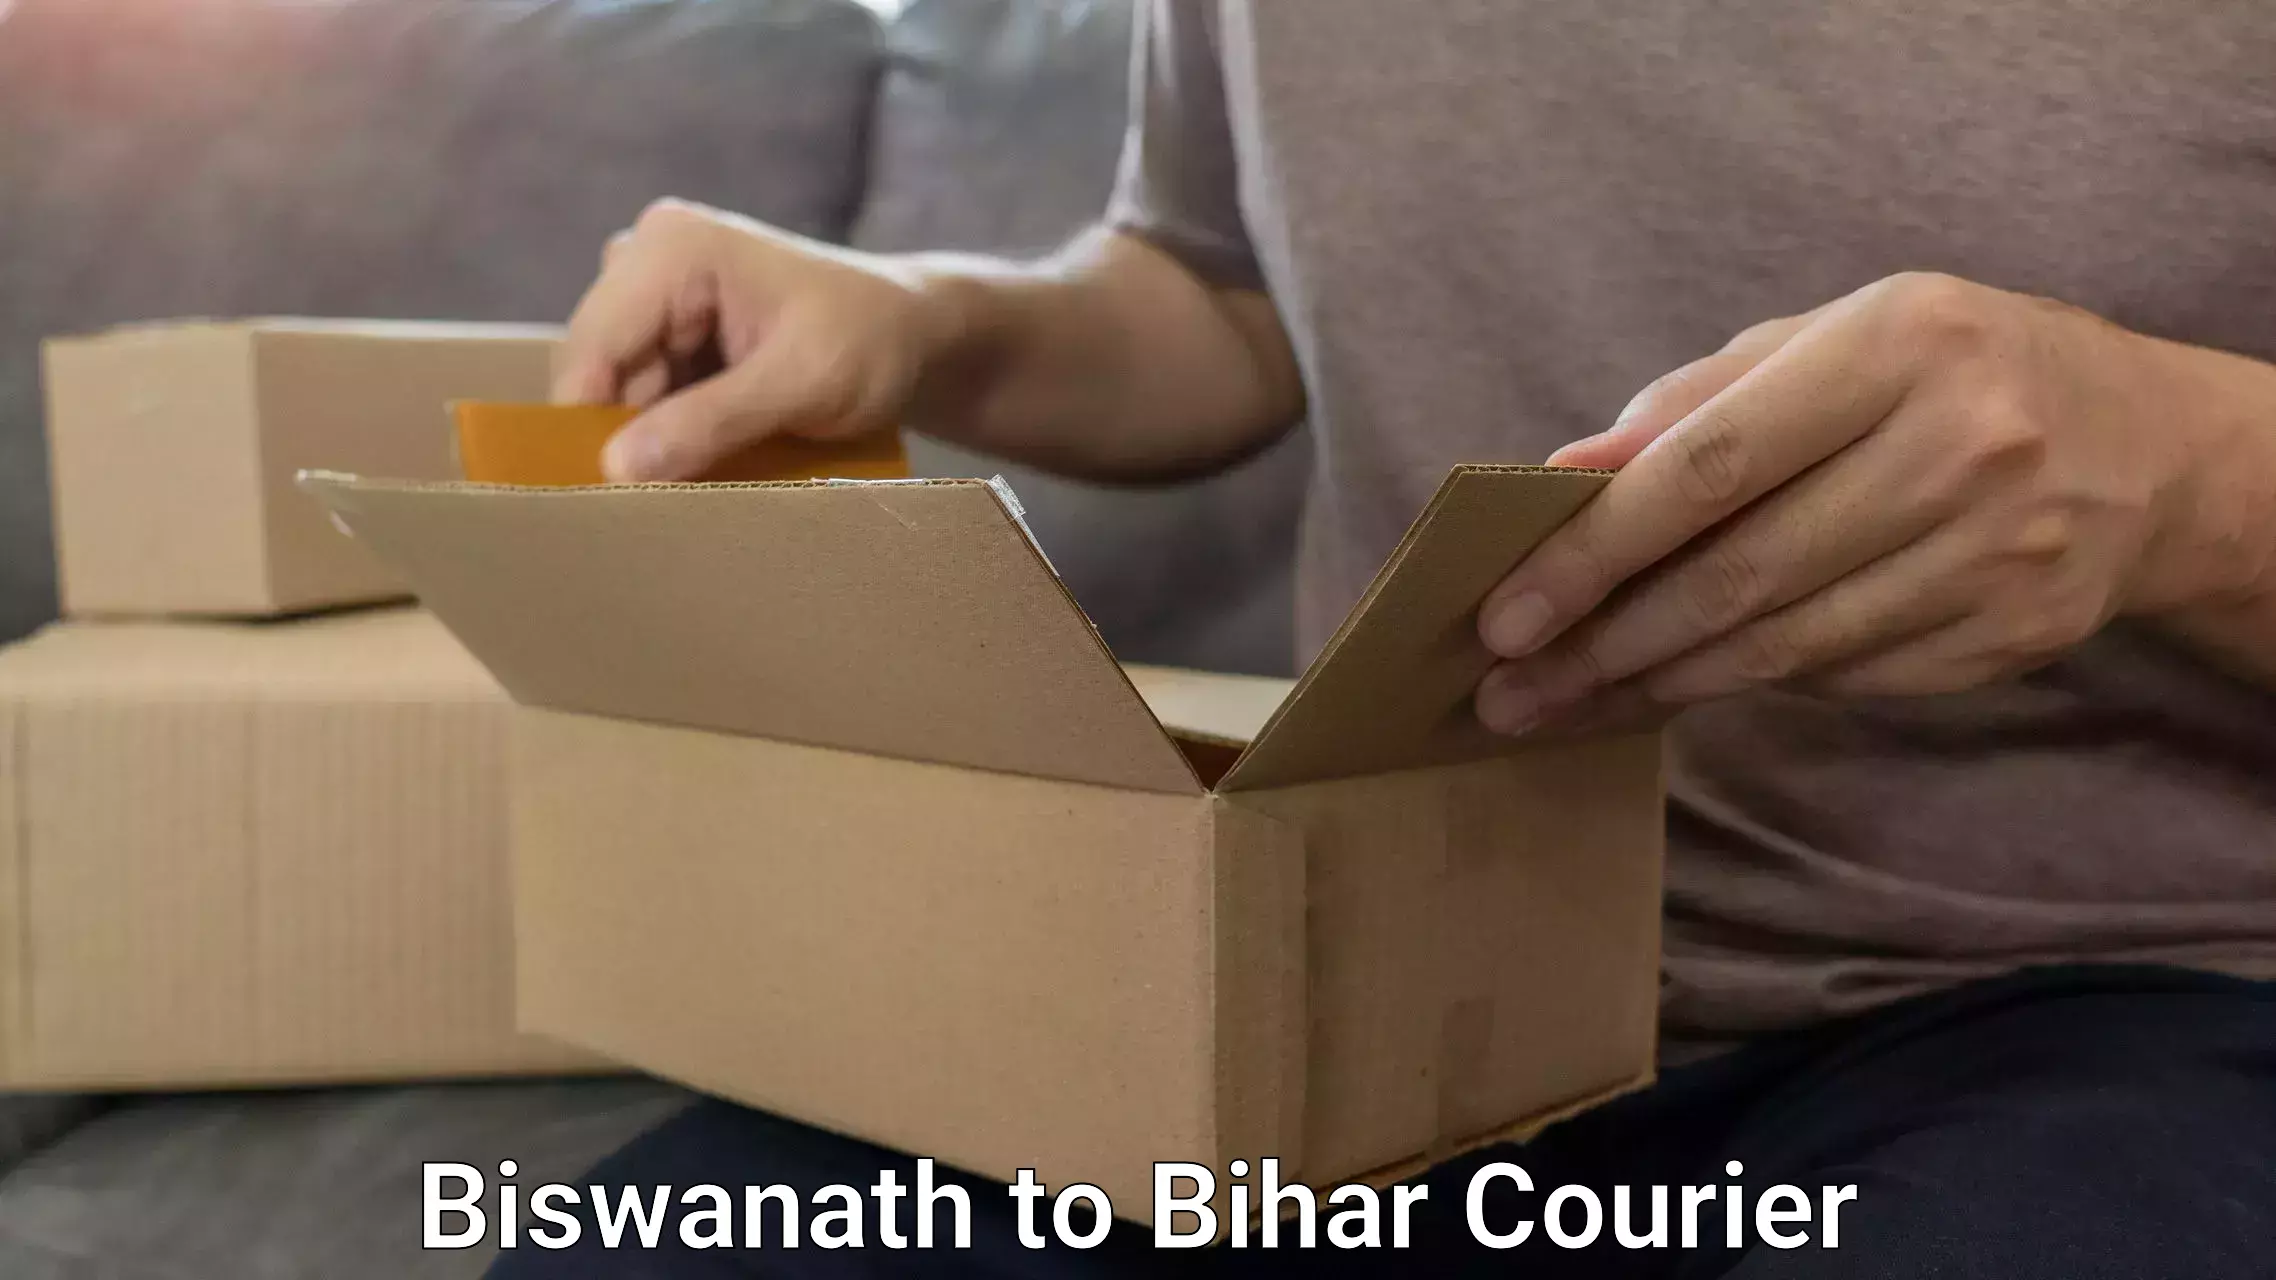 Overnight baggage shipping in Biswanath to Gaya